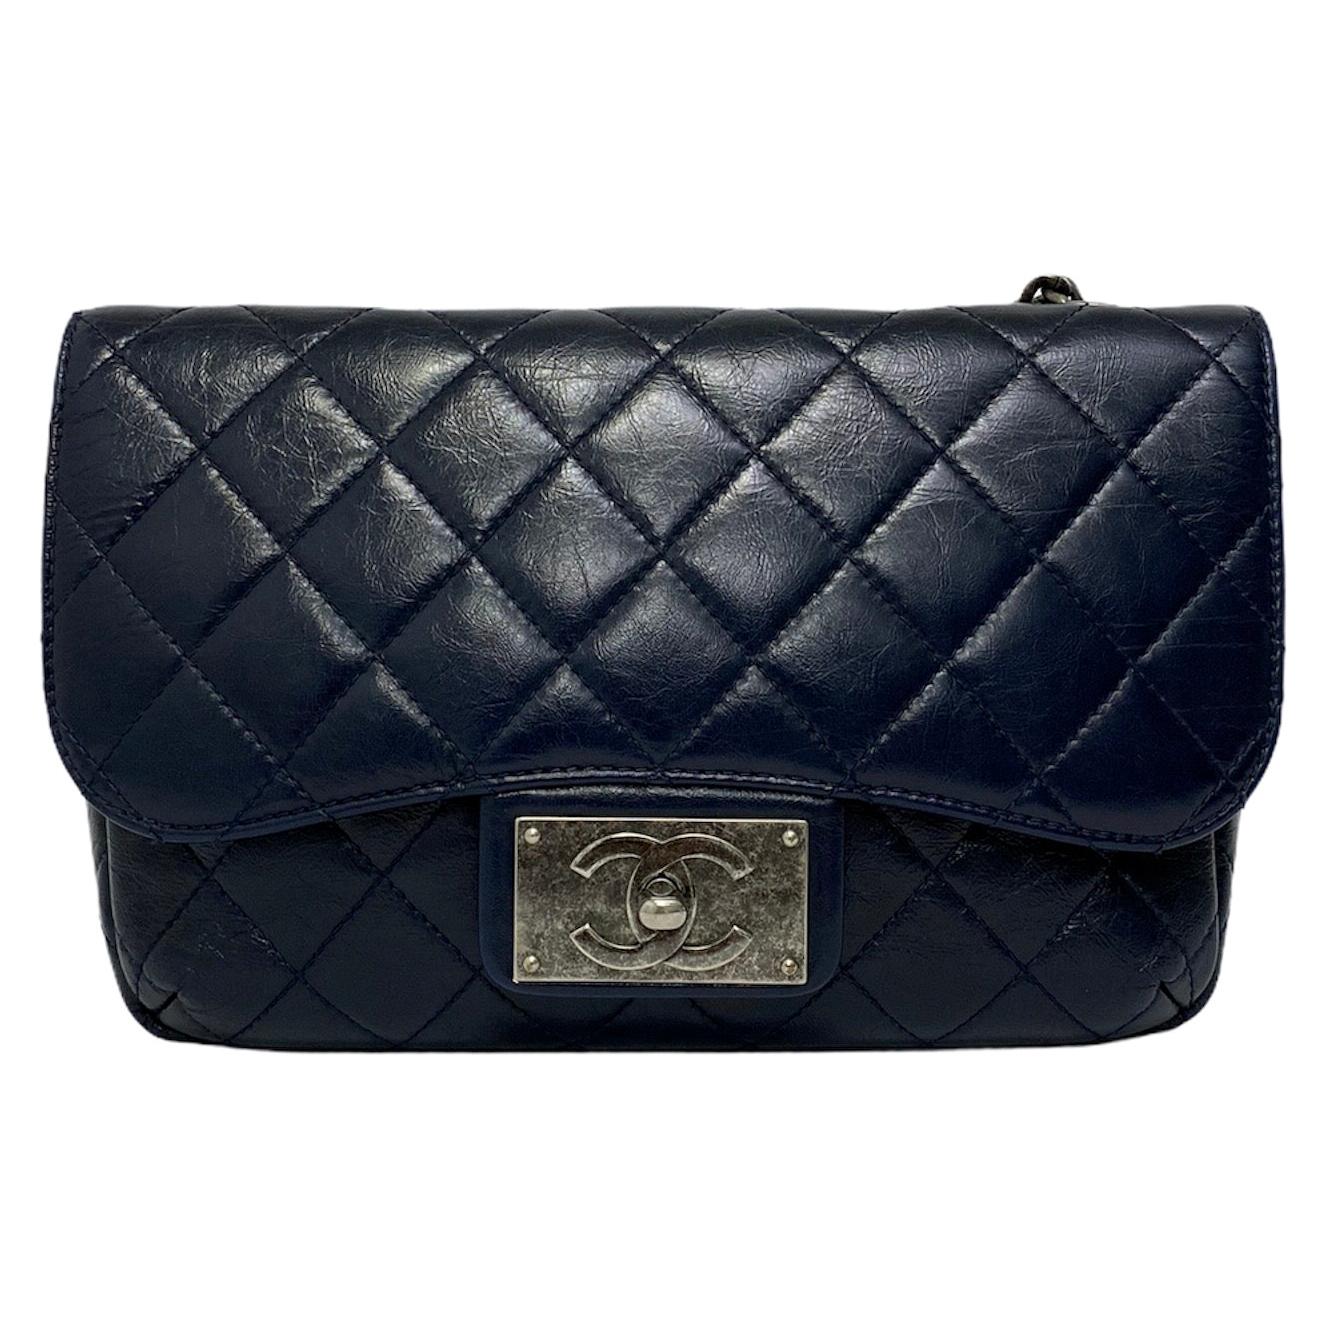 Chanel Blue Bag in Leather with Silver Hardware